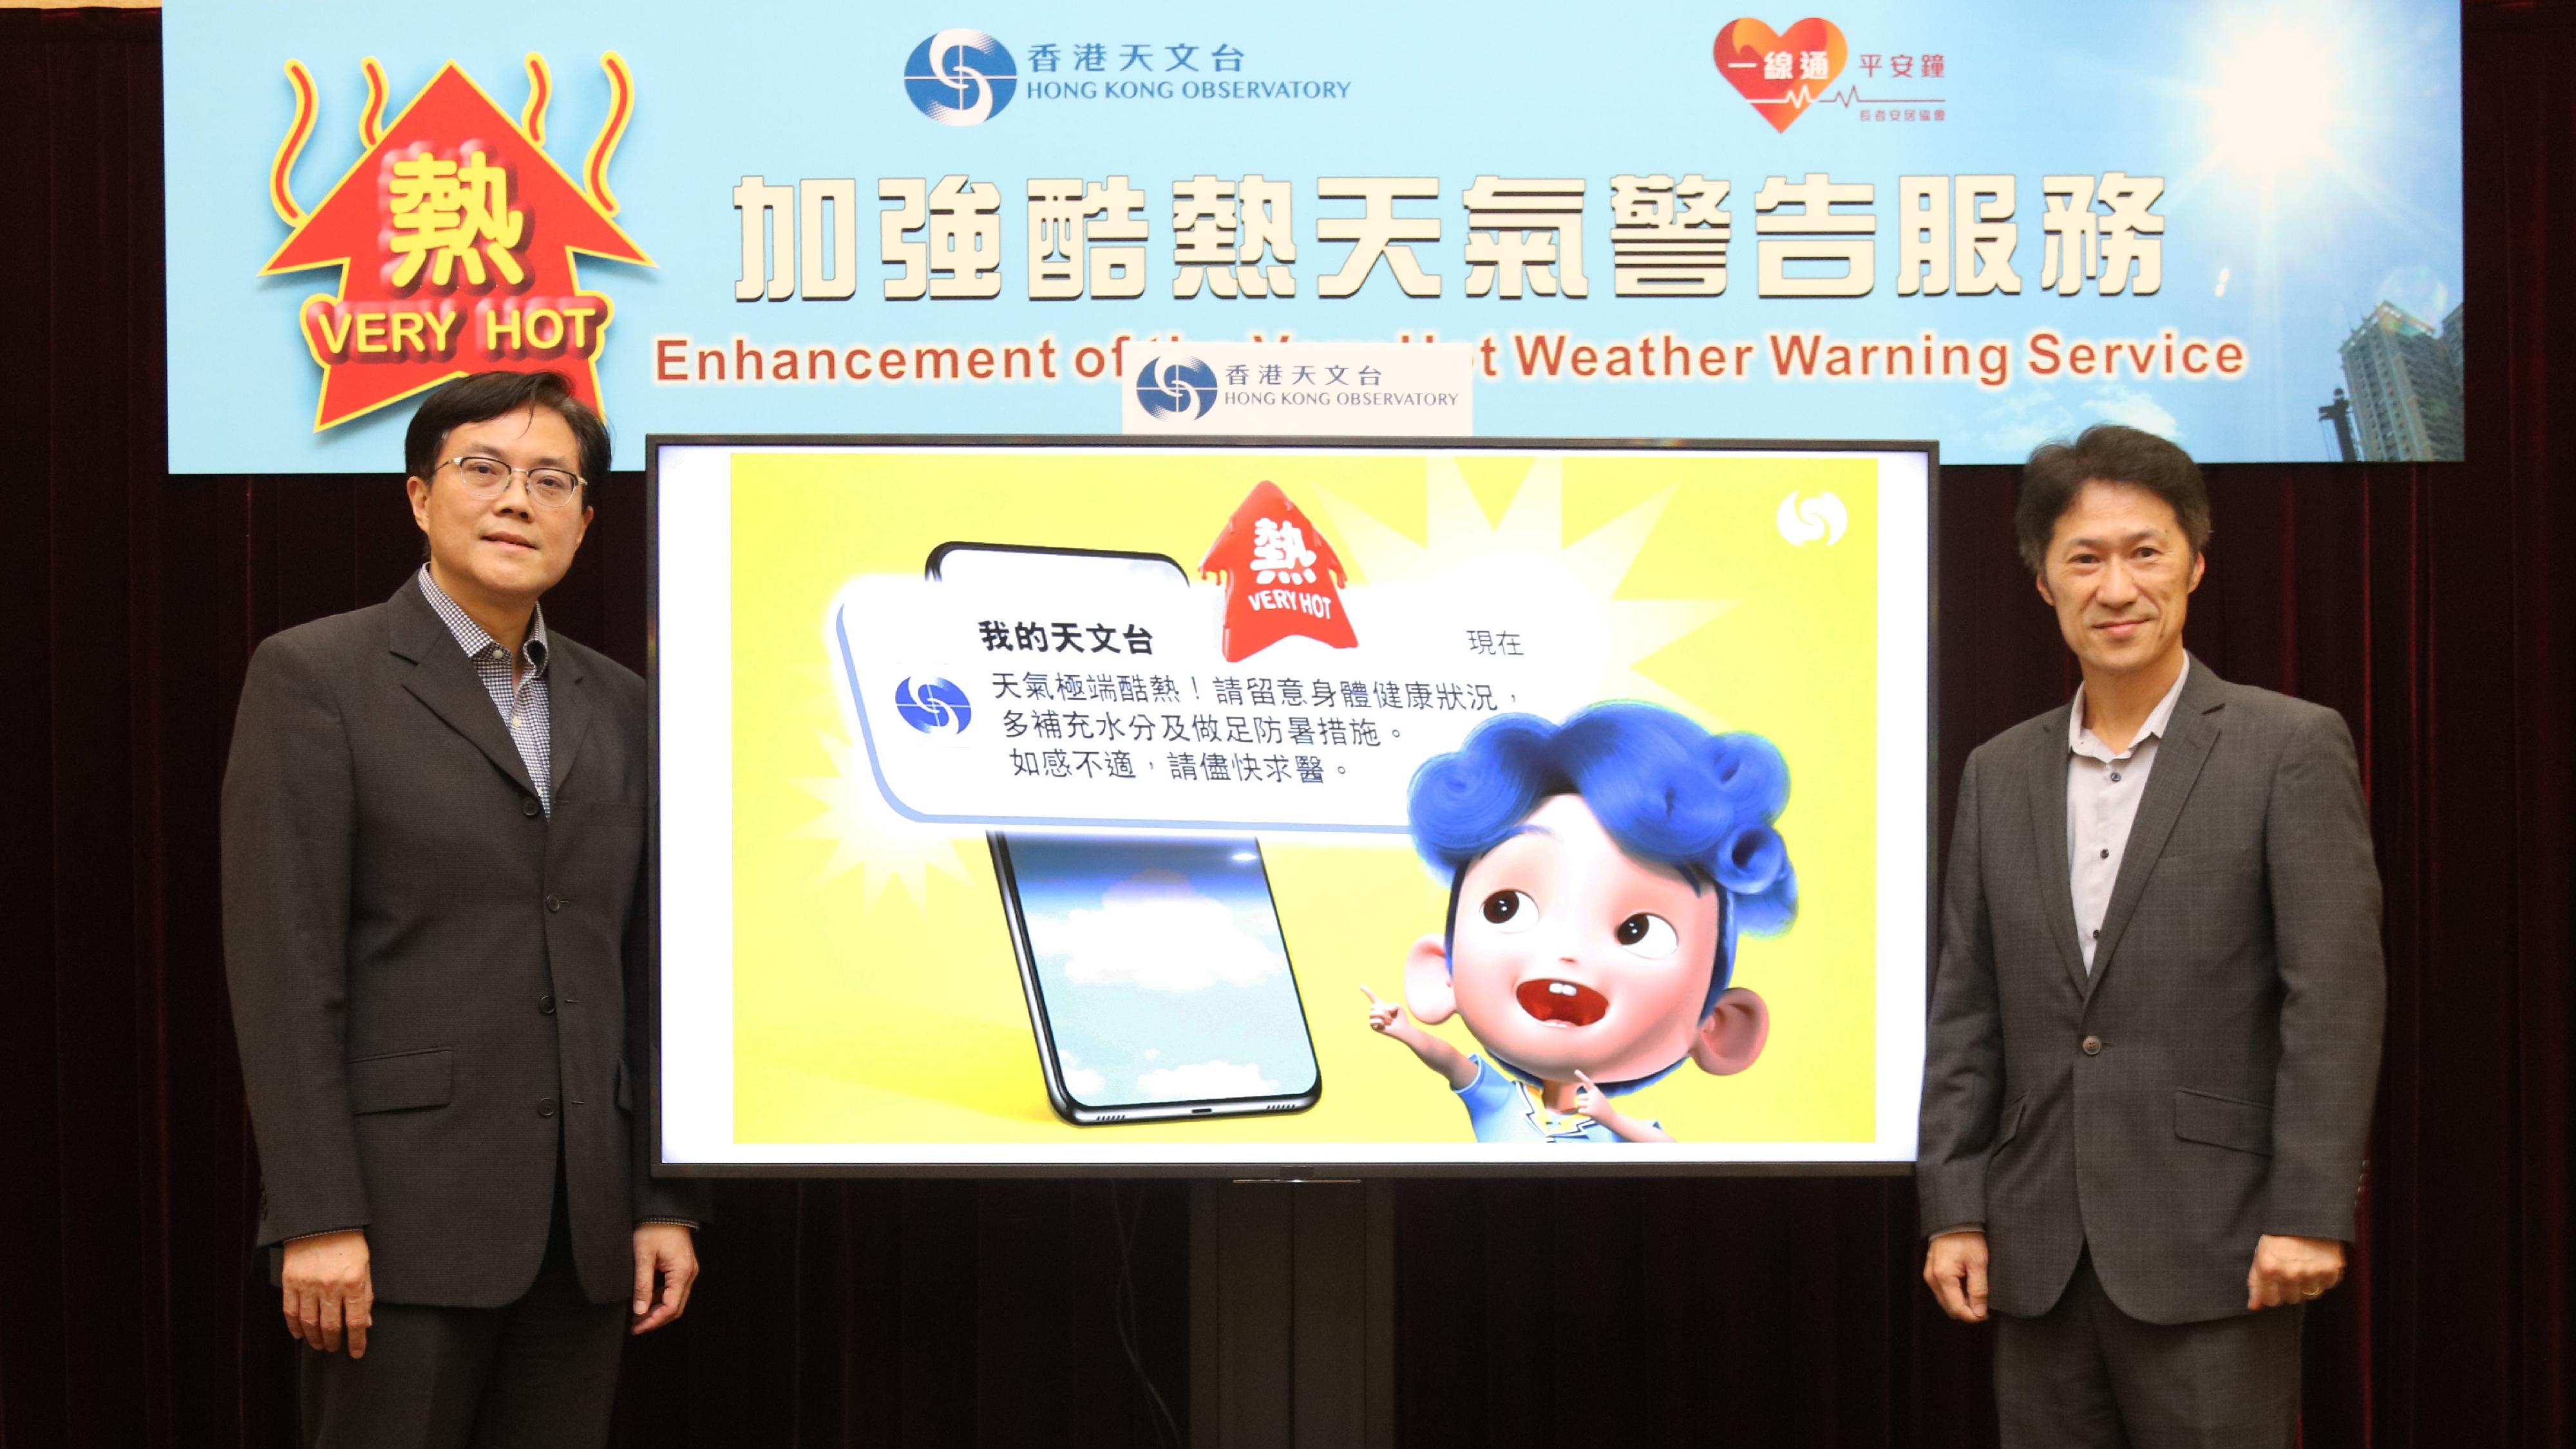 The Acting Assistant Director of the Hong Kong Observatory, Mr Cheng Yuen-chung (left), and the Acting Chief Executive Officer of the Senior Citizen Home Safety Association, Mr Johnny Yuen, held a joint press conference today (May 26) to introduce the enhanced Very Hot Weather Warning service, and to remind the public to get prepared for the very hot weather in summer.